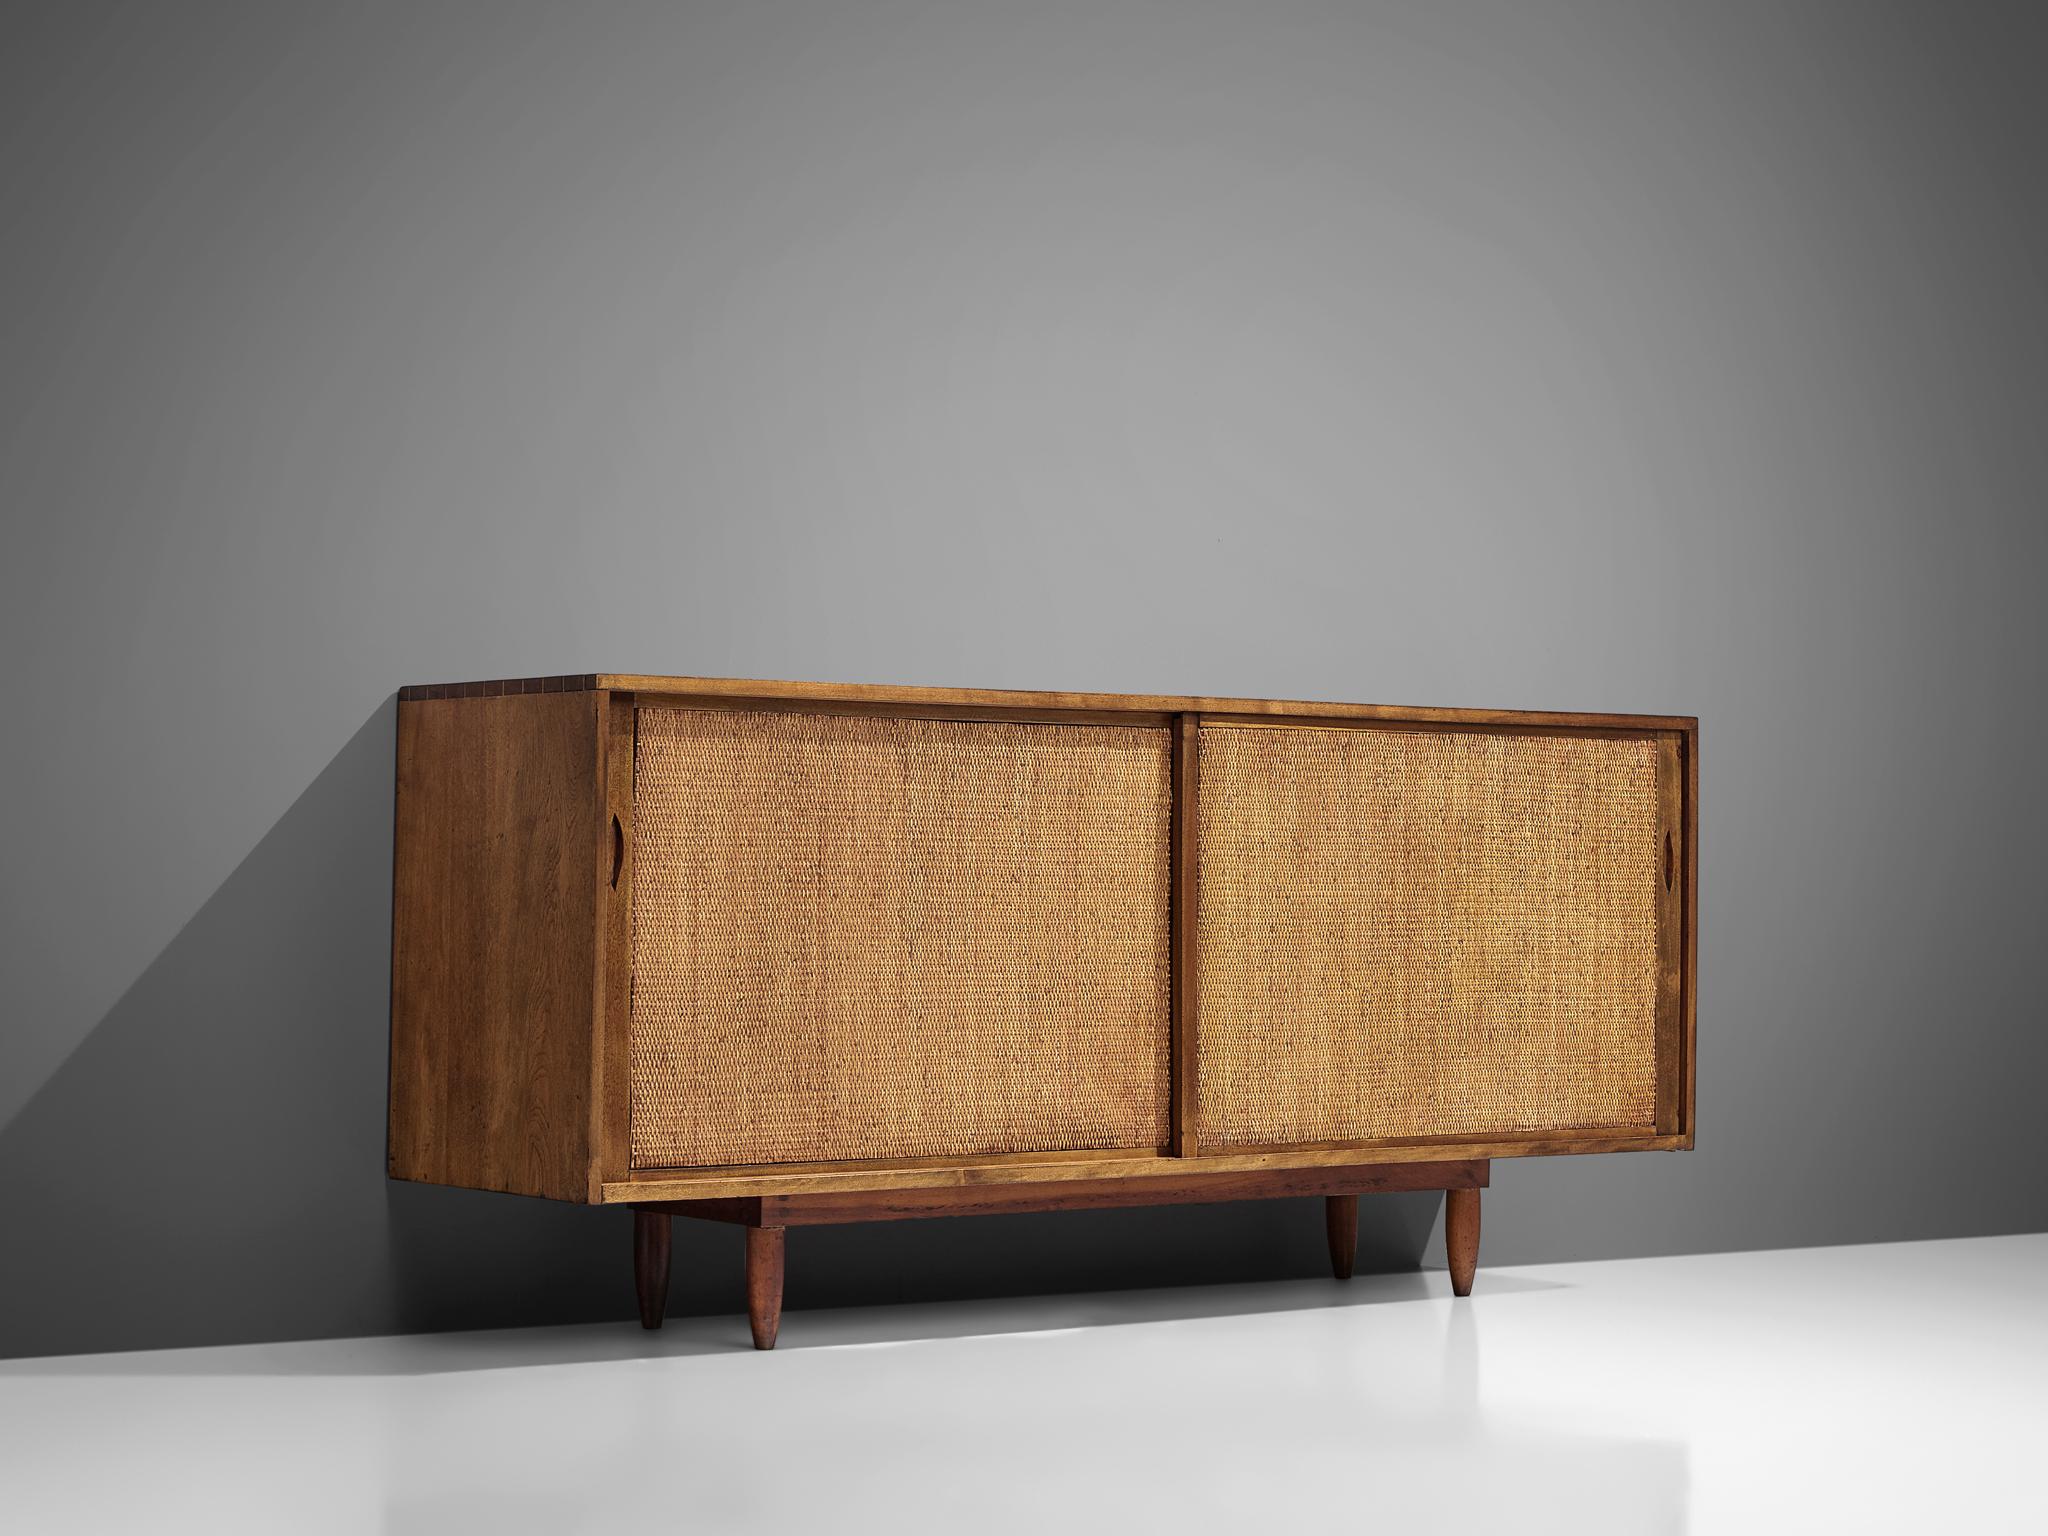 Phillip Lloyd Powell, sideboard, American walnut and grass-cloth, United States, circa 1960

This sideboard is designed and made by Phillip Lloyd Powell. The credenza is made out of solid walnut and the sliding doors are covered with grass-cloth.